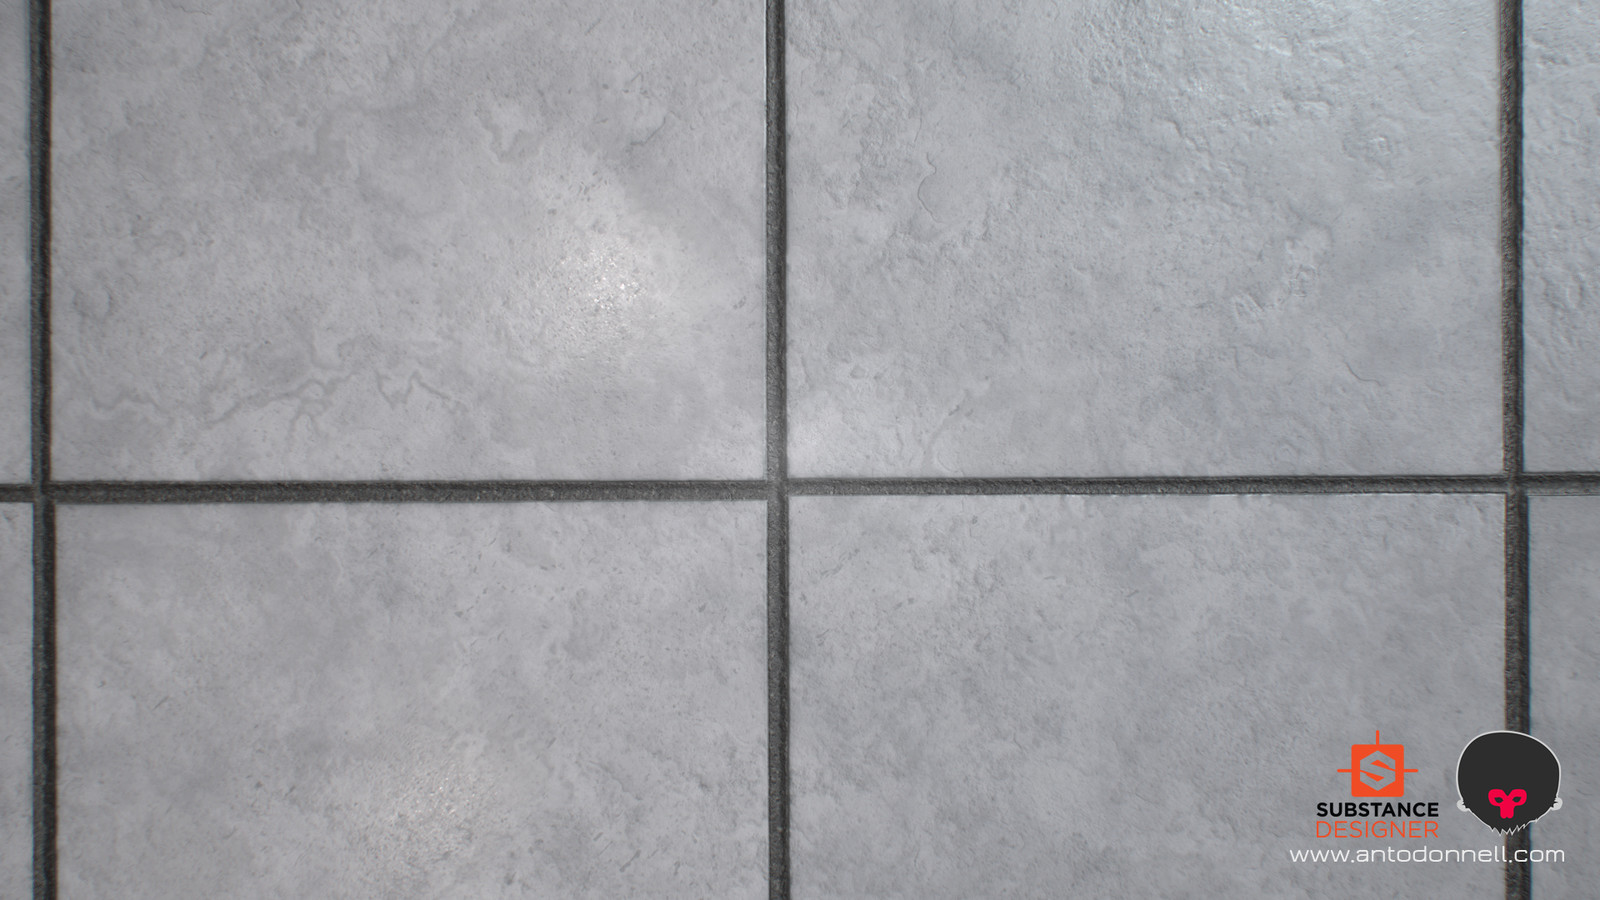 A shot of the floor tiles material